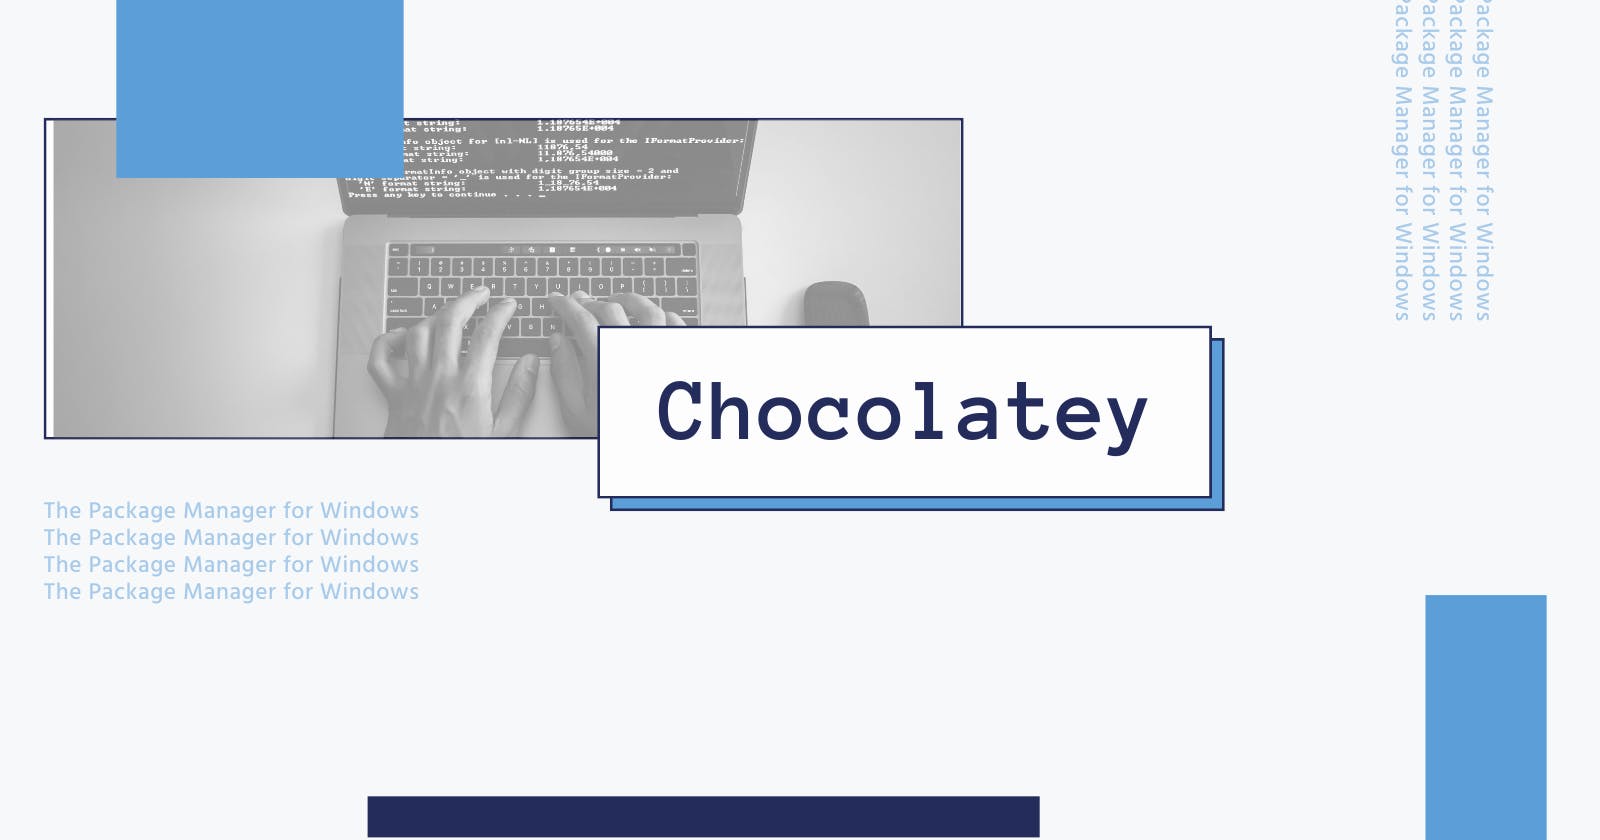 Installing Chocolatey: The Windows Package Manager